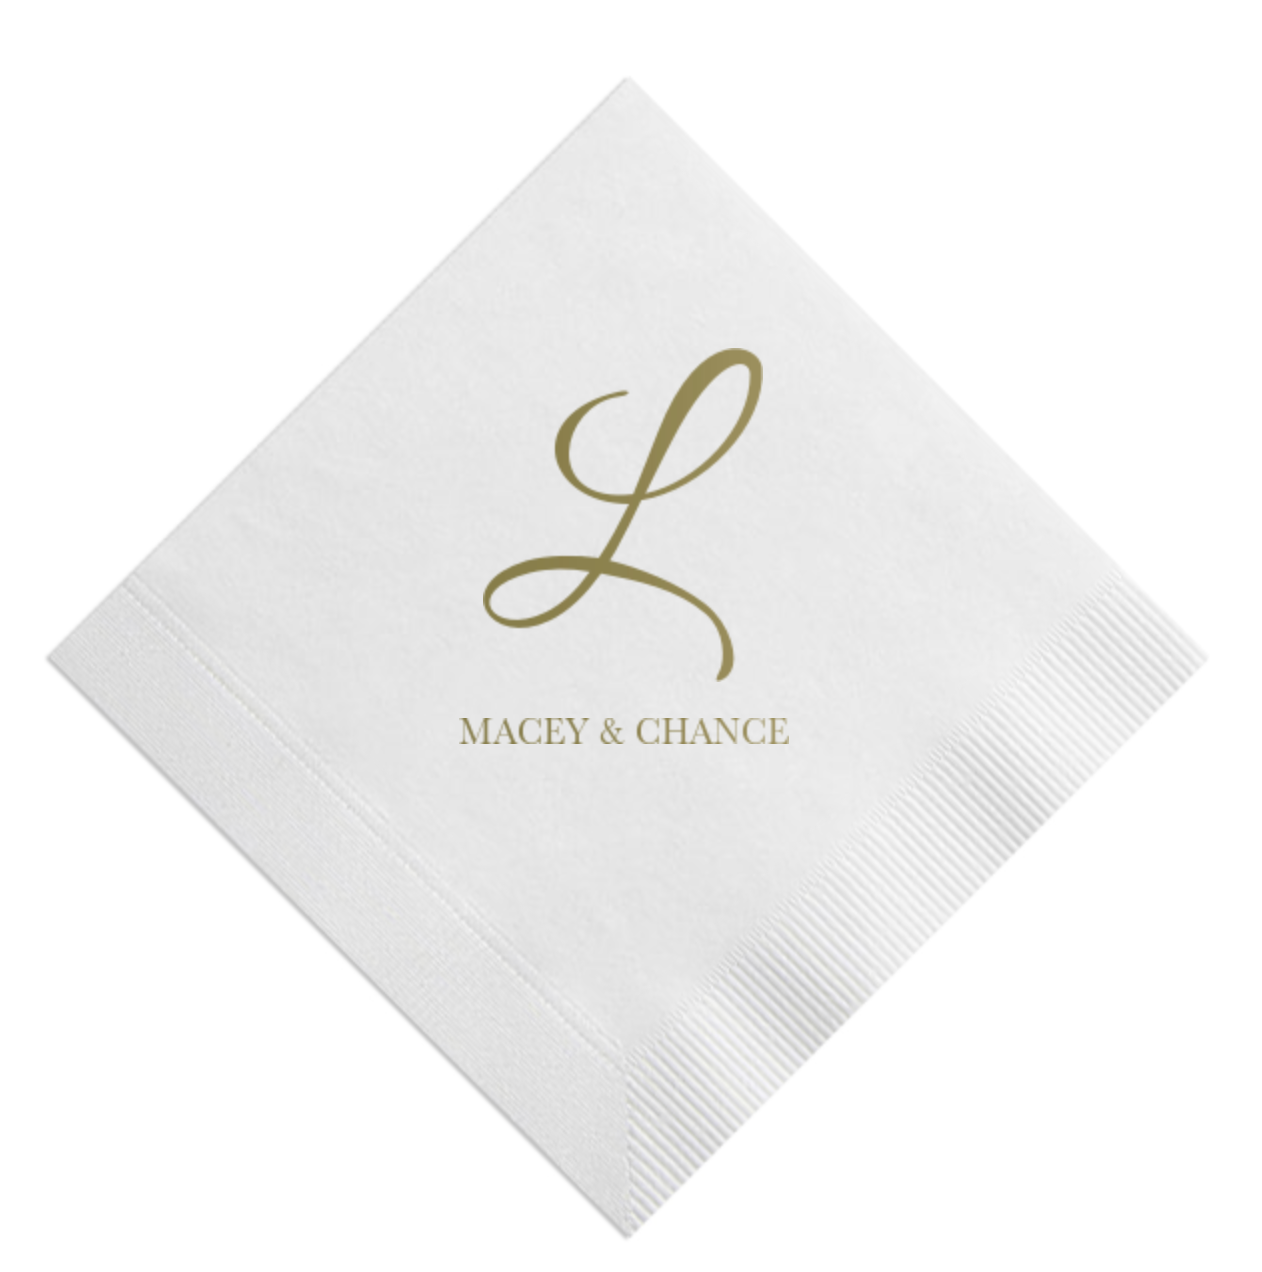 Personalized Napkins    |    Big Initial